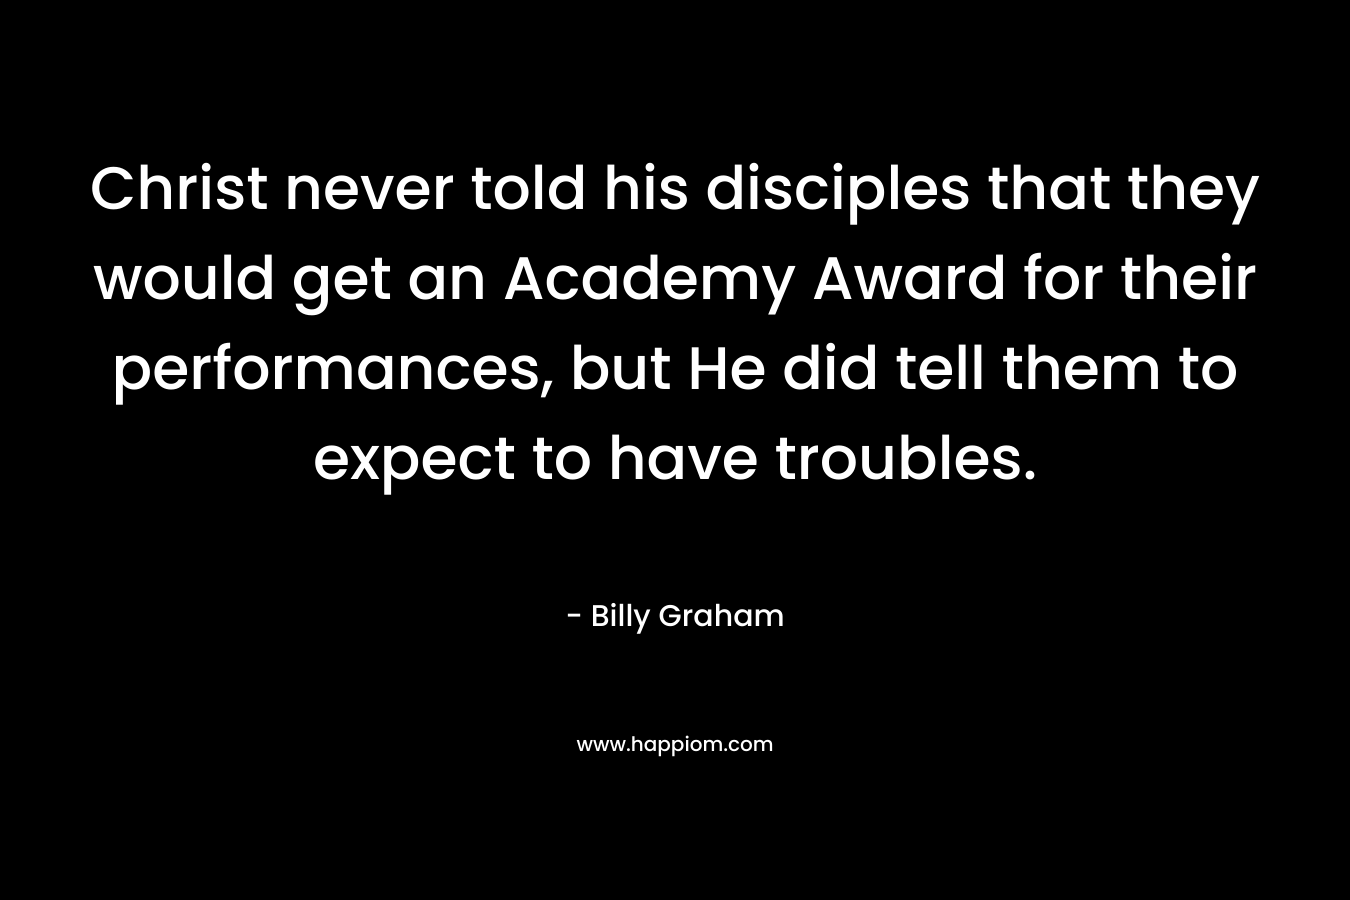 Christ never told his disciples that they would get an Academy Award for their performances, but He did tell them to expect to have troubles.